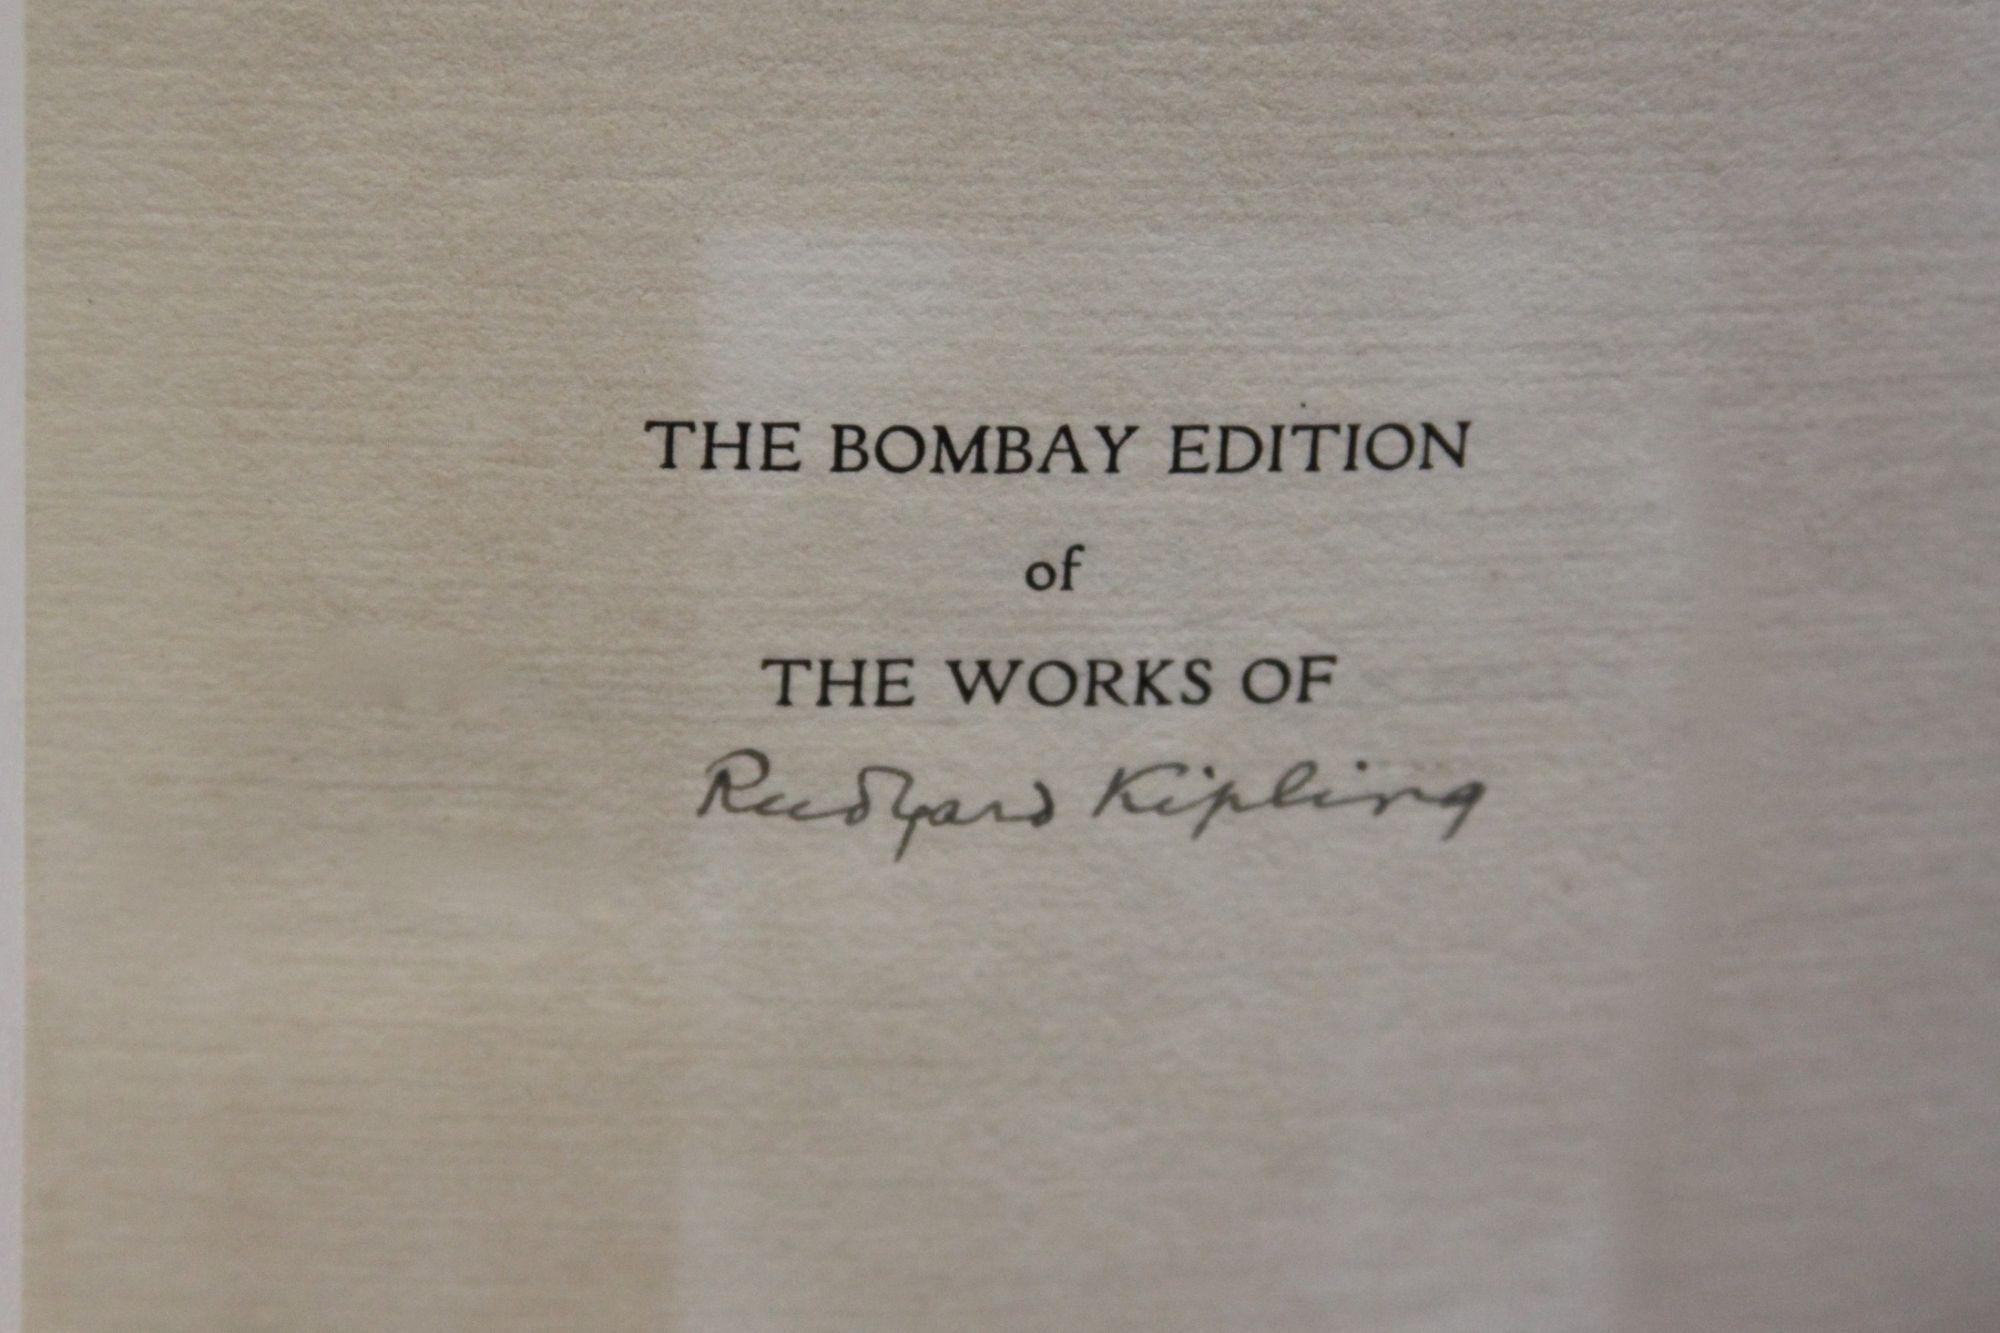 Thirty-one volumes. 

First published in 25 volumes but eventually grew to 31 volumes as Kipling continued to write. 

Signed by Ruyard Kipling in volume one on the front title page. 

This edition consists of 1050 copies printed by R. and R